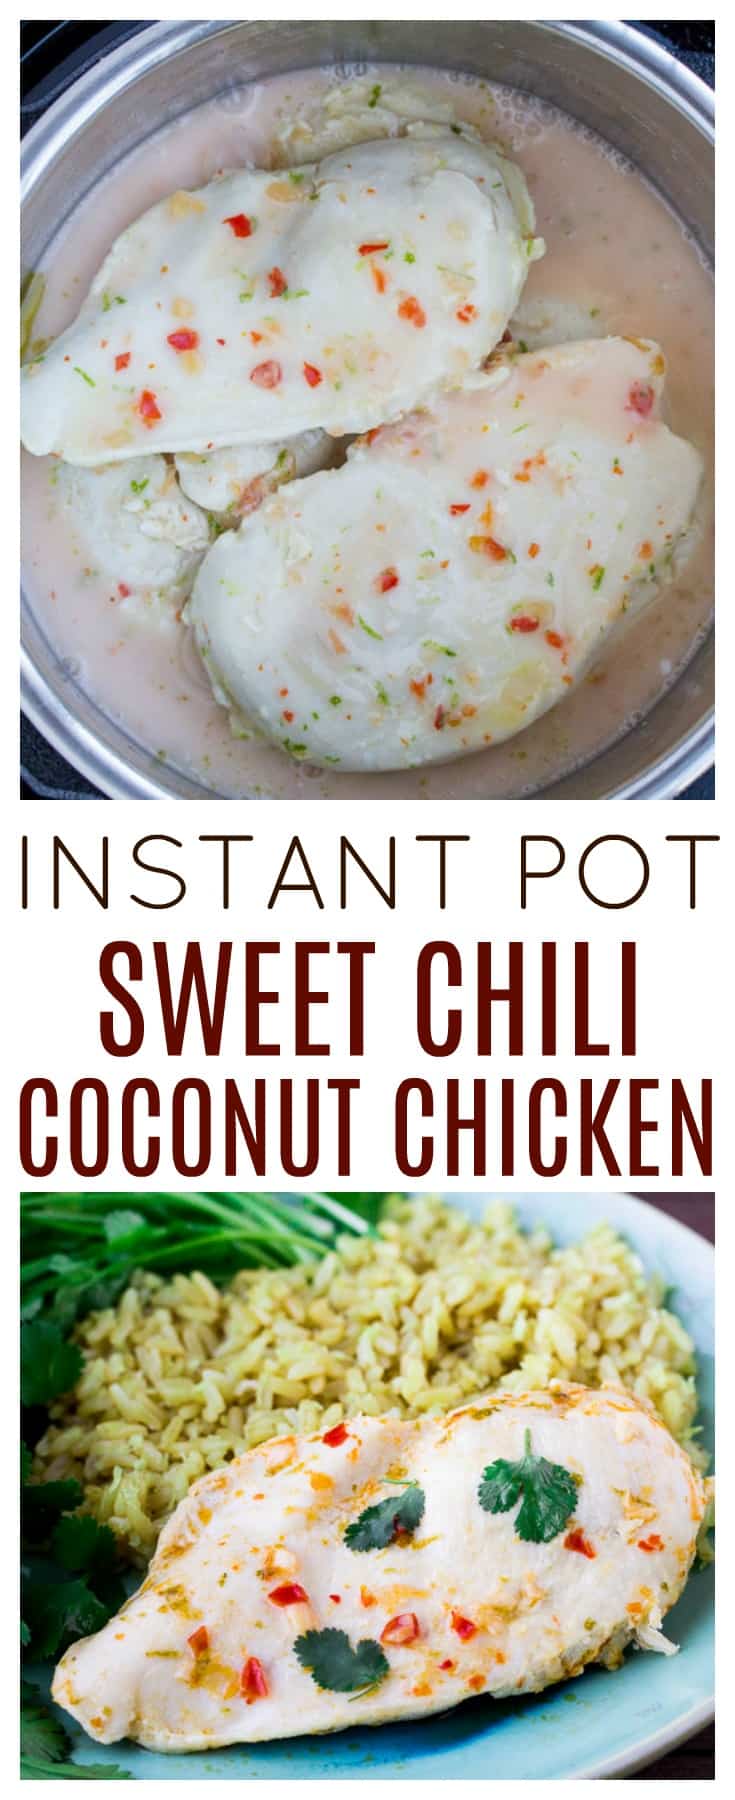 This Instant Pot Sweet Chili Coconut Chicken is an easy recipe that is quick to make for dinner. Serve over rice with a side of veggies for a complete meal! The sauce is a delicious combination of coconut and sweet chili with a hint of lime in every bite! | #dlbrecipes #instantpot #chicken #coconutchicken #glutenfree